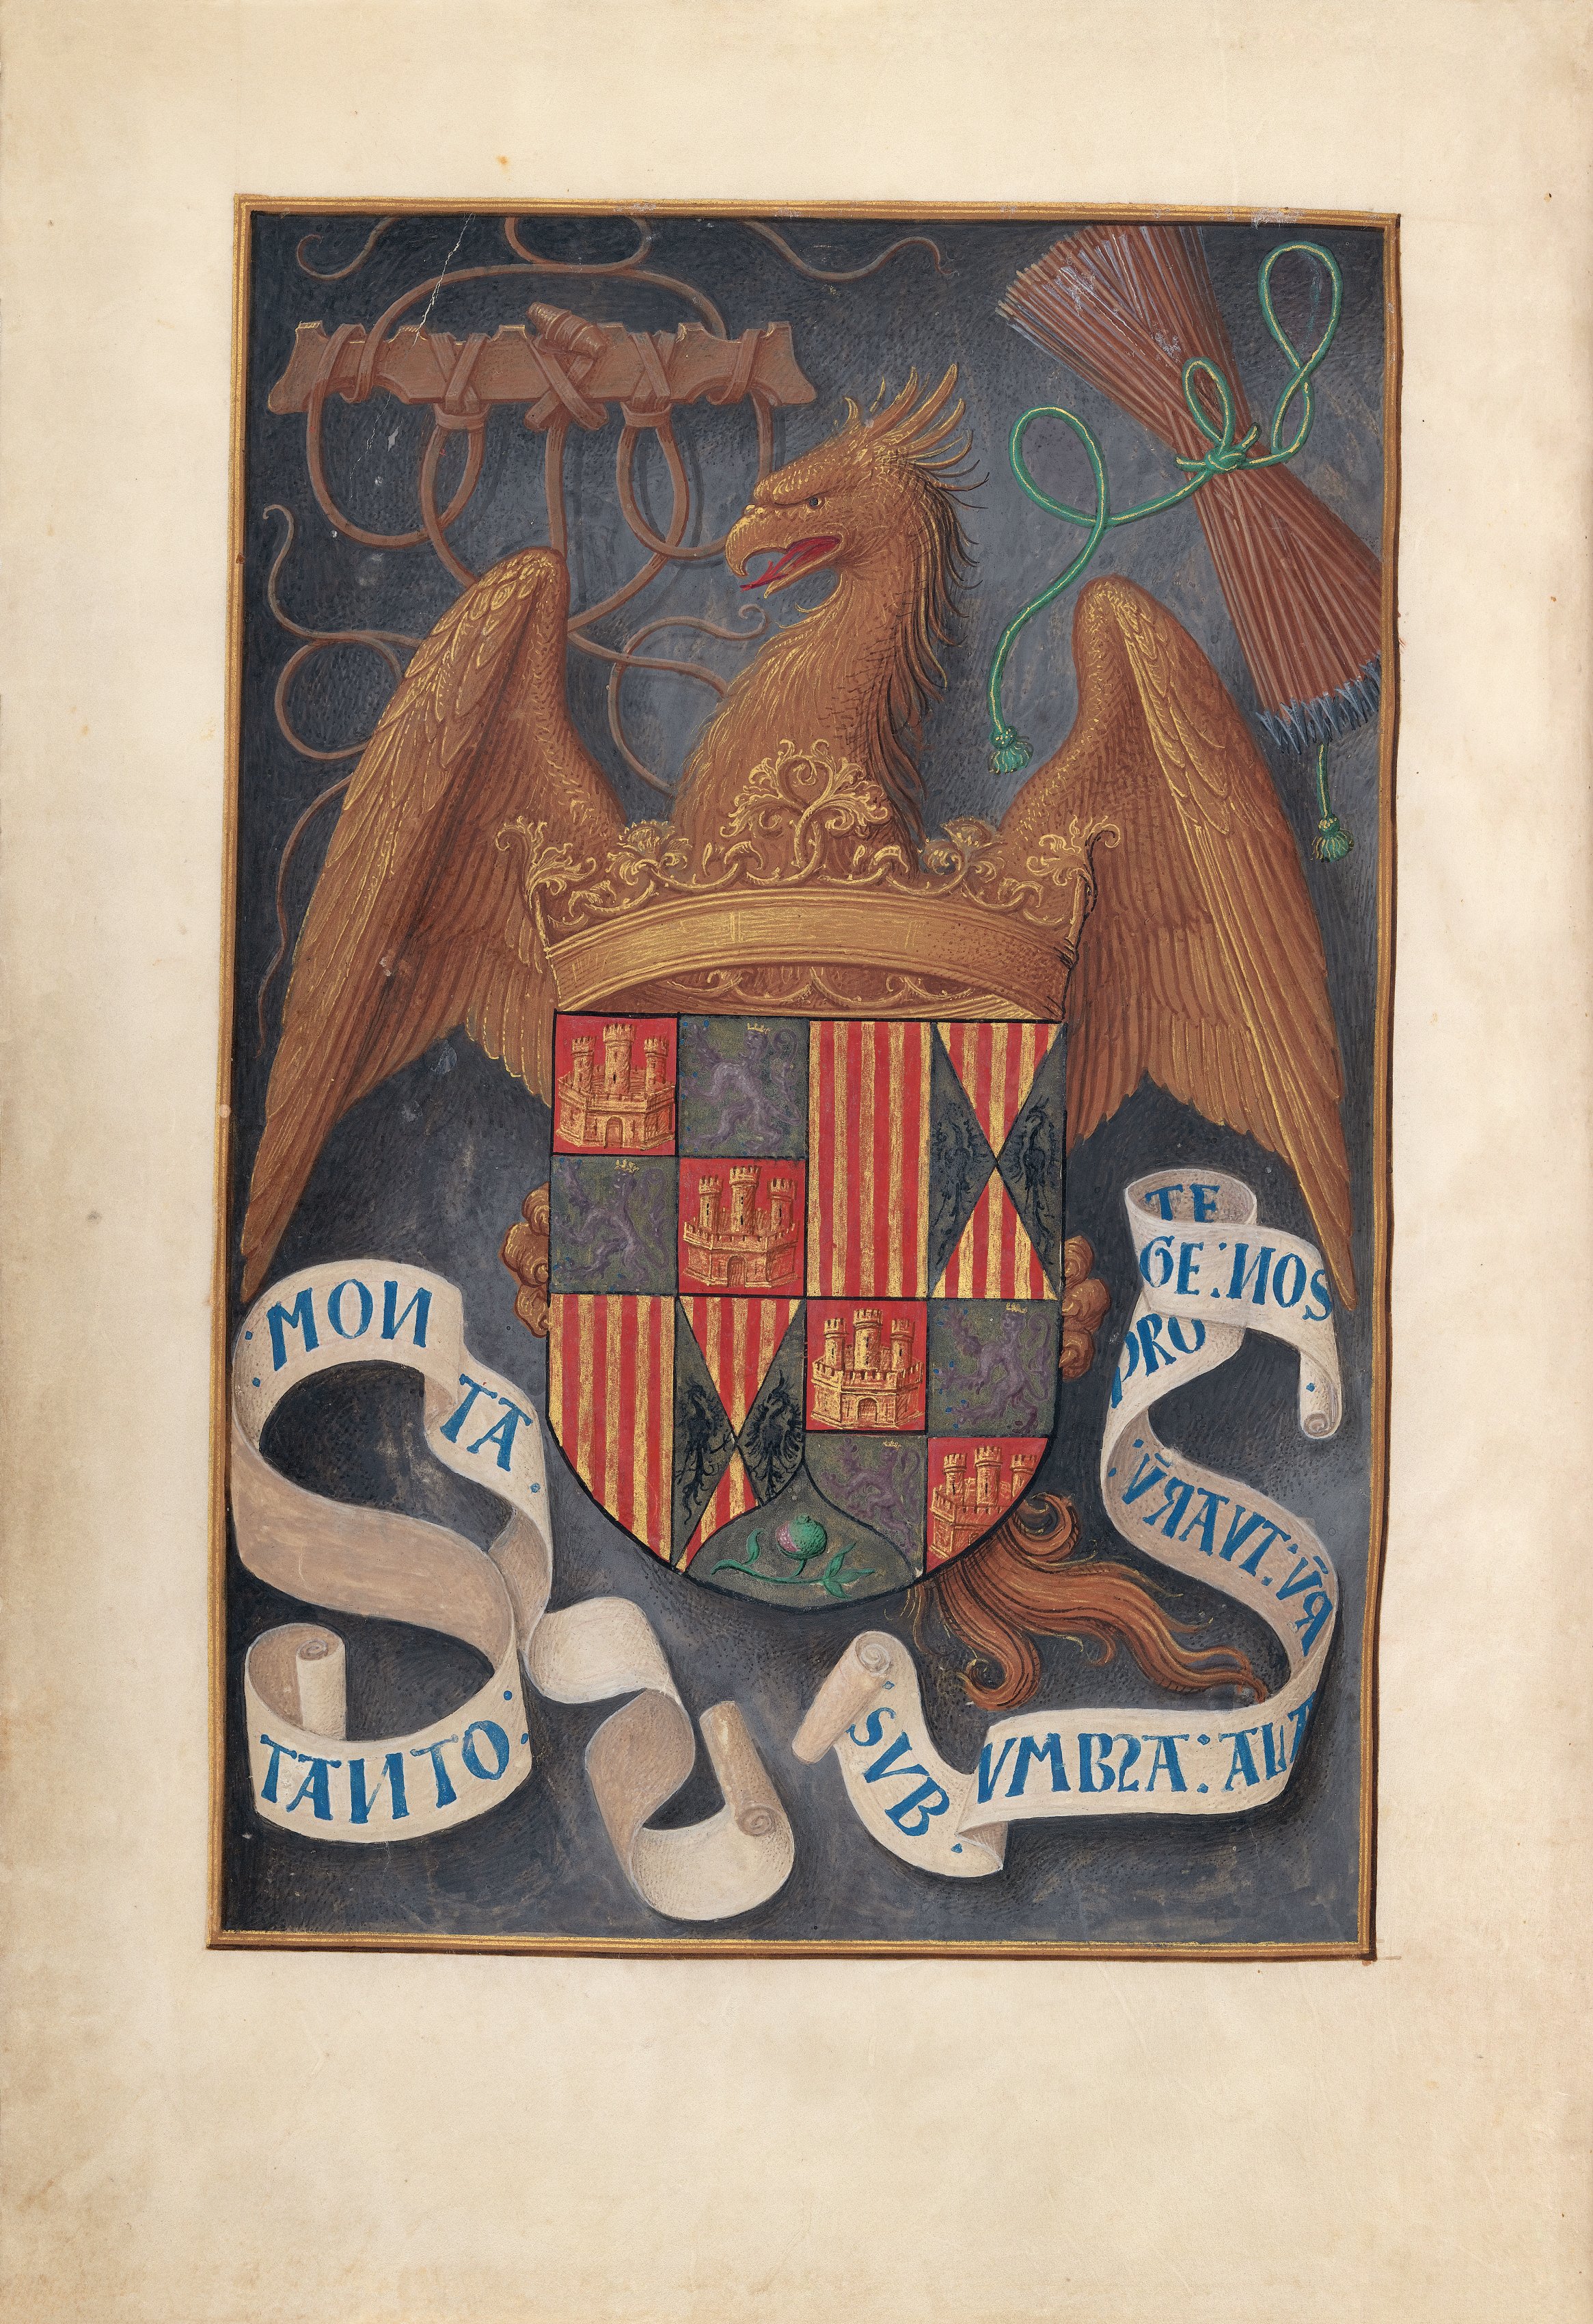 Hours of Queen Isabella the Catholic, Queen of Spain:  Fol. 1v, Arms and Mottoes of Isabel la Católica